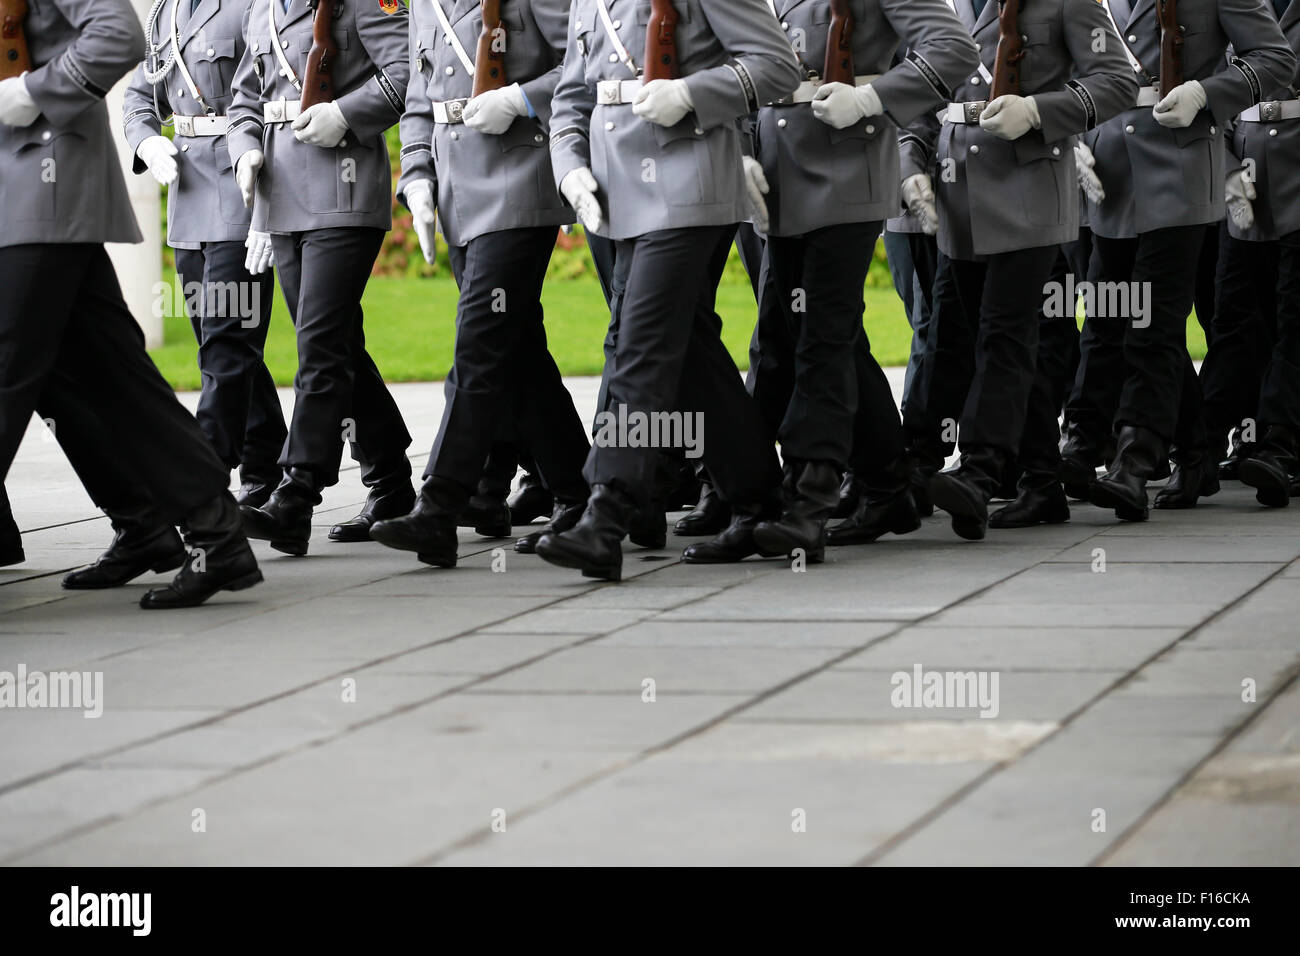 Berlin, Germany. 28th August, 2015. German Chancellor Angela Merkel welcomes Lars Løkke Rasmussen, Prime Minister of Denmark, with militar honors  at the German Chancellery in Berlin Germany on 28 August 2015. / Picture: German Soldiers Credit:  Reynaldo Chaib Paganelli/Alamy Live News Stock Photo